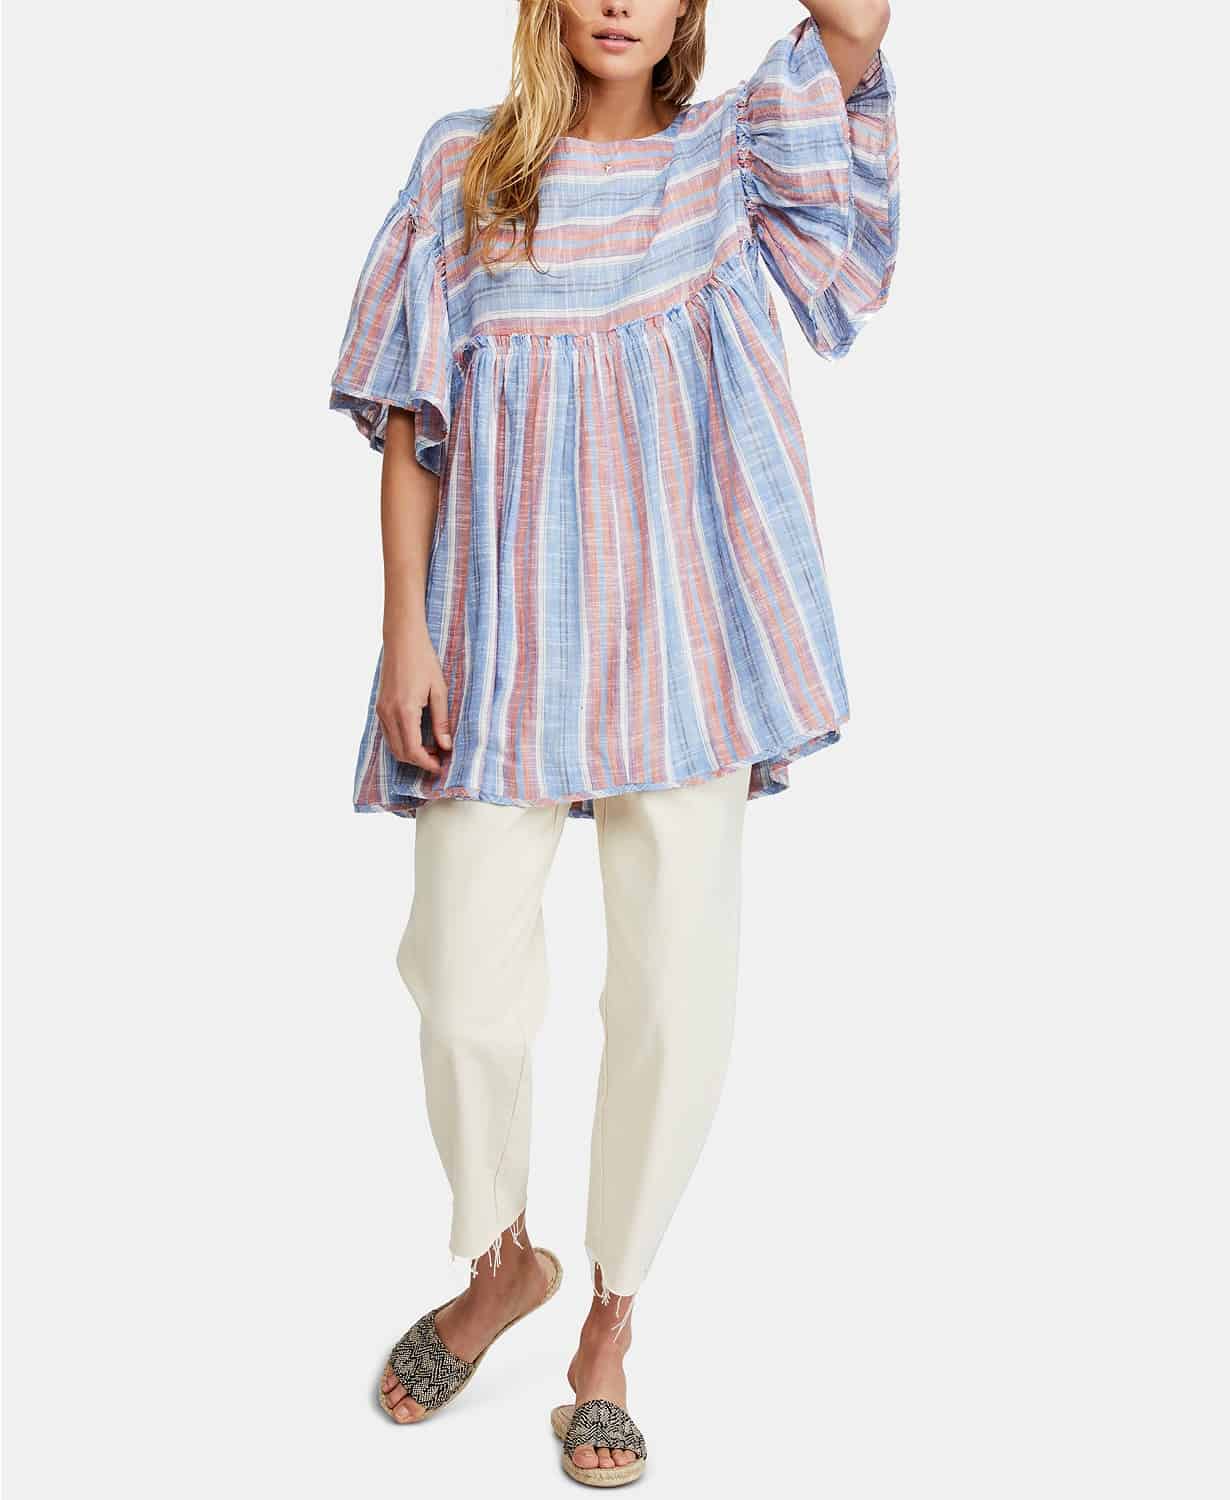 Free People Sale at Macy’s